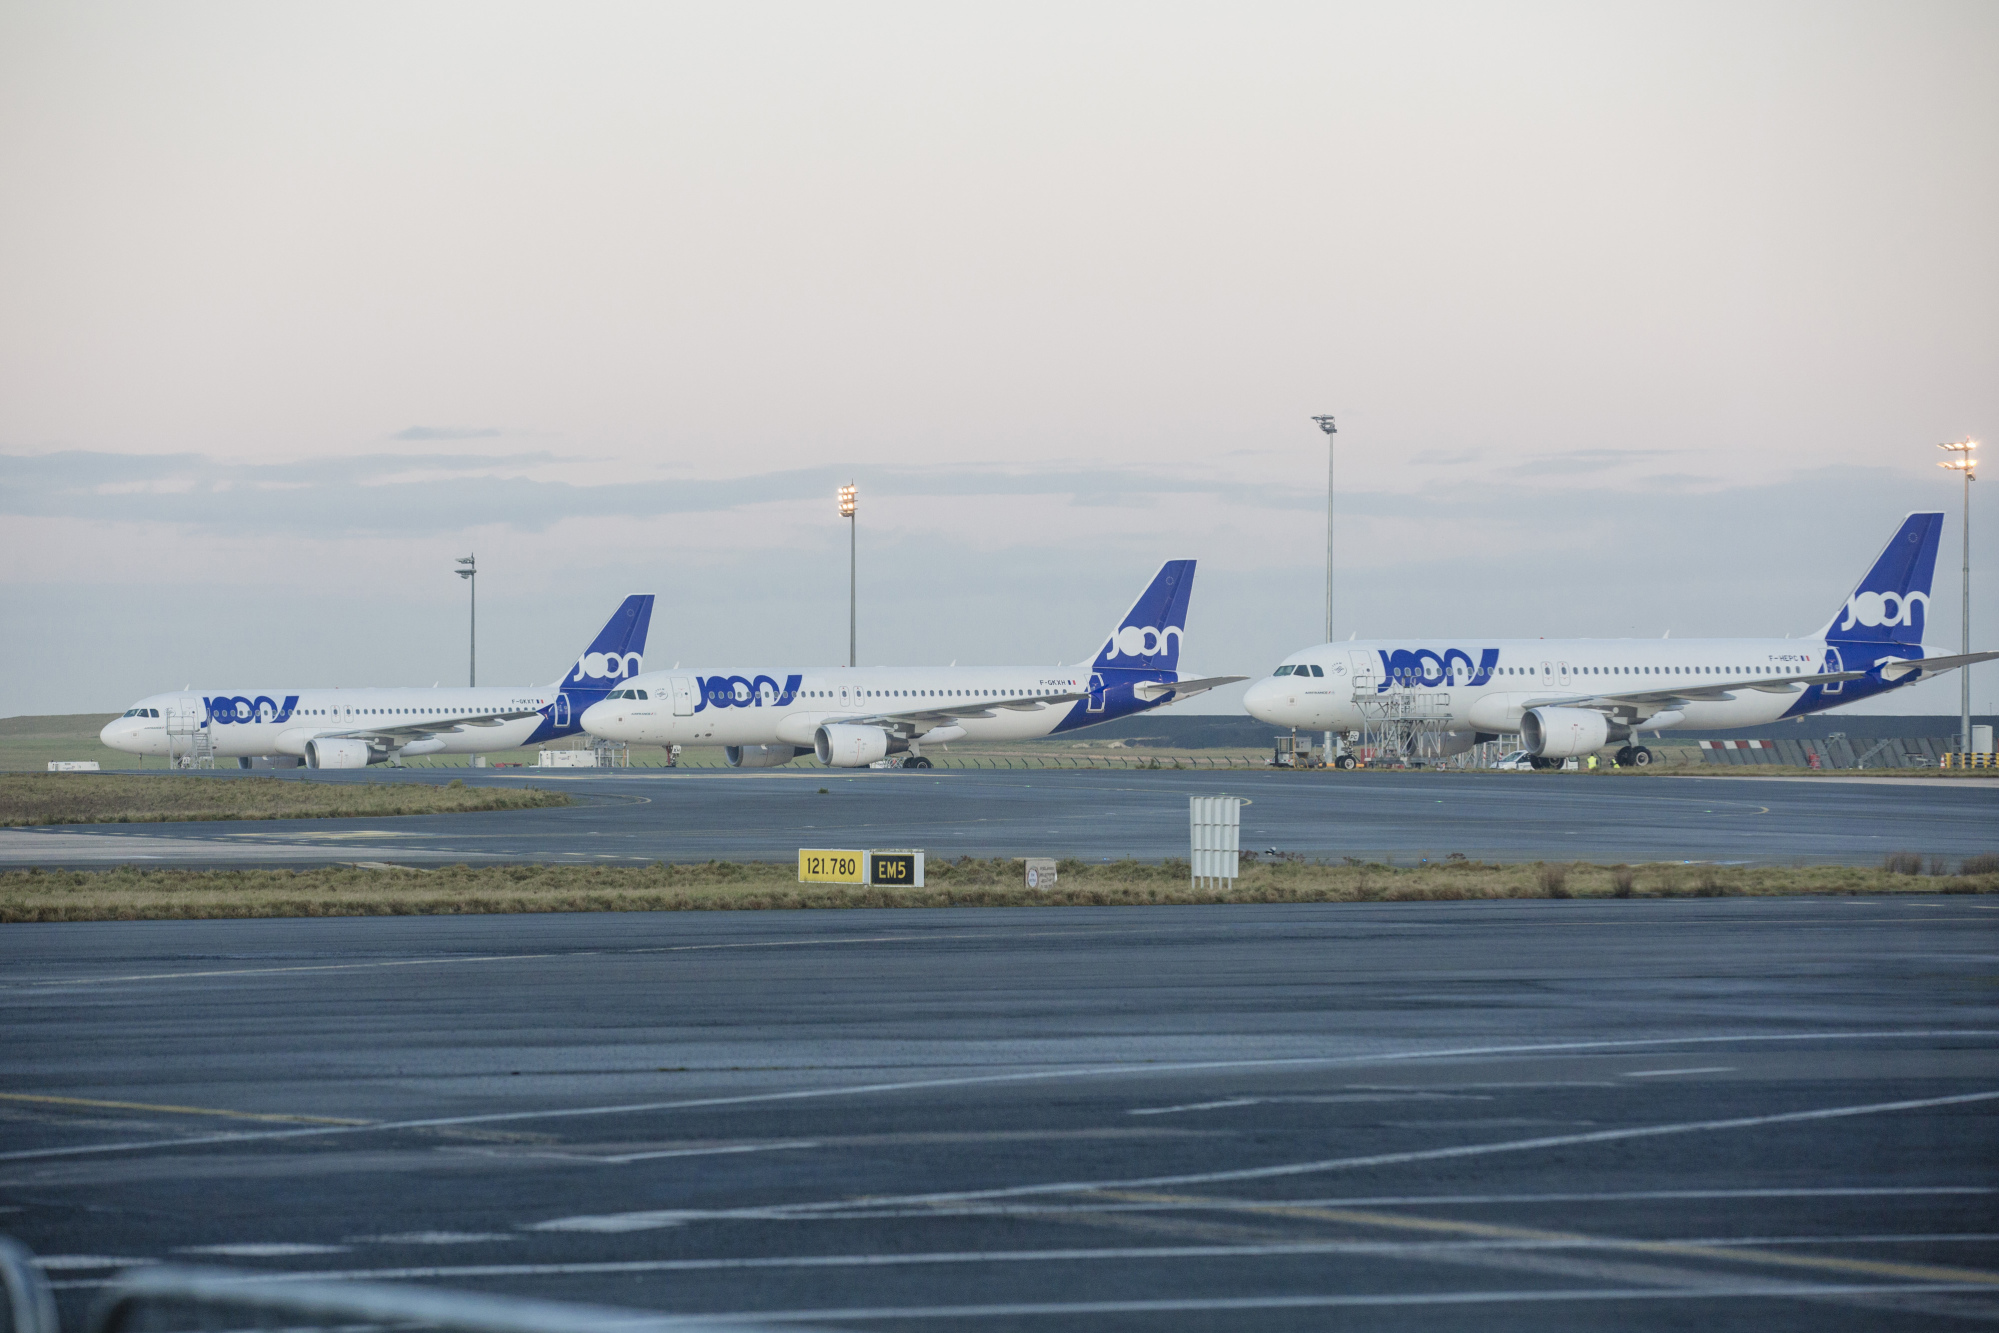 Joon jets at Charles de Gaulle Airport in Roissy, France, in 2017.